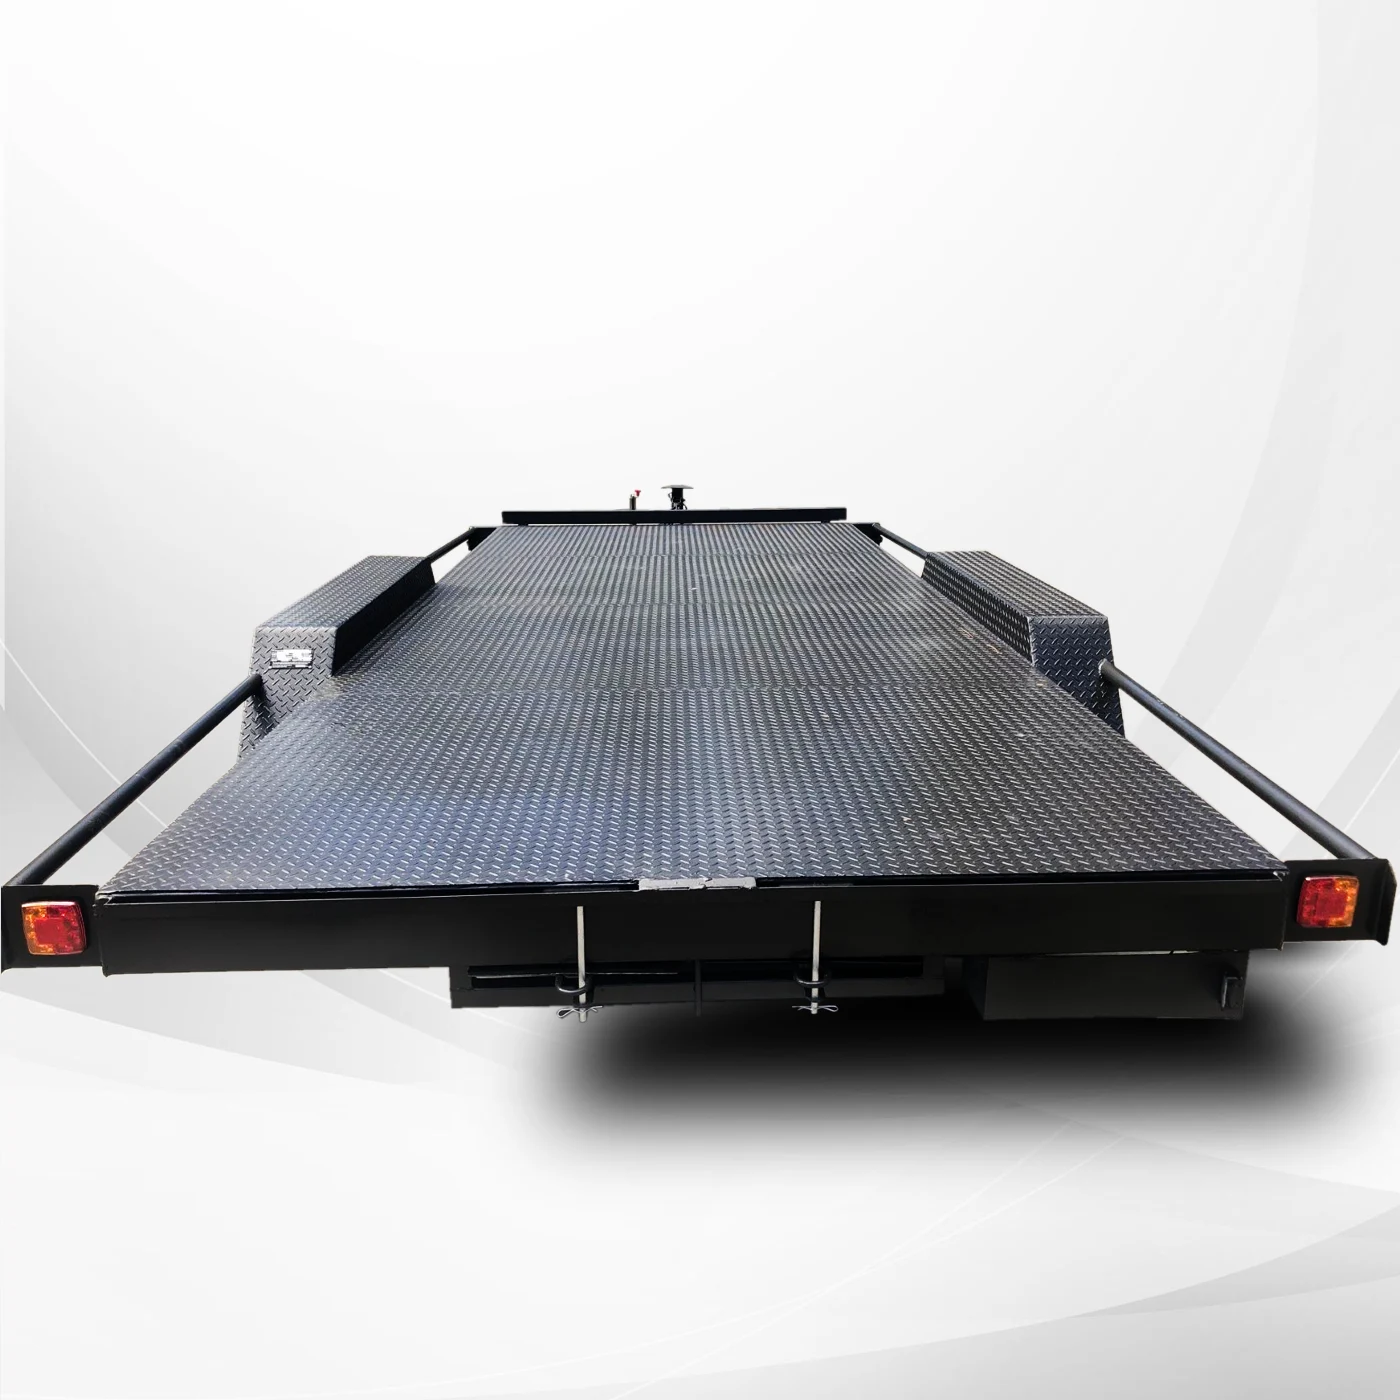 16 Foot Semi Flat Top Car Carrier Trailer for Sale - 2800 KG ATM Load Capacity